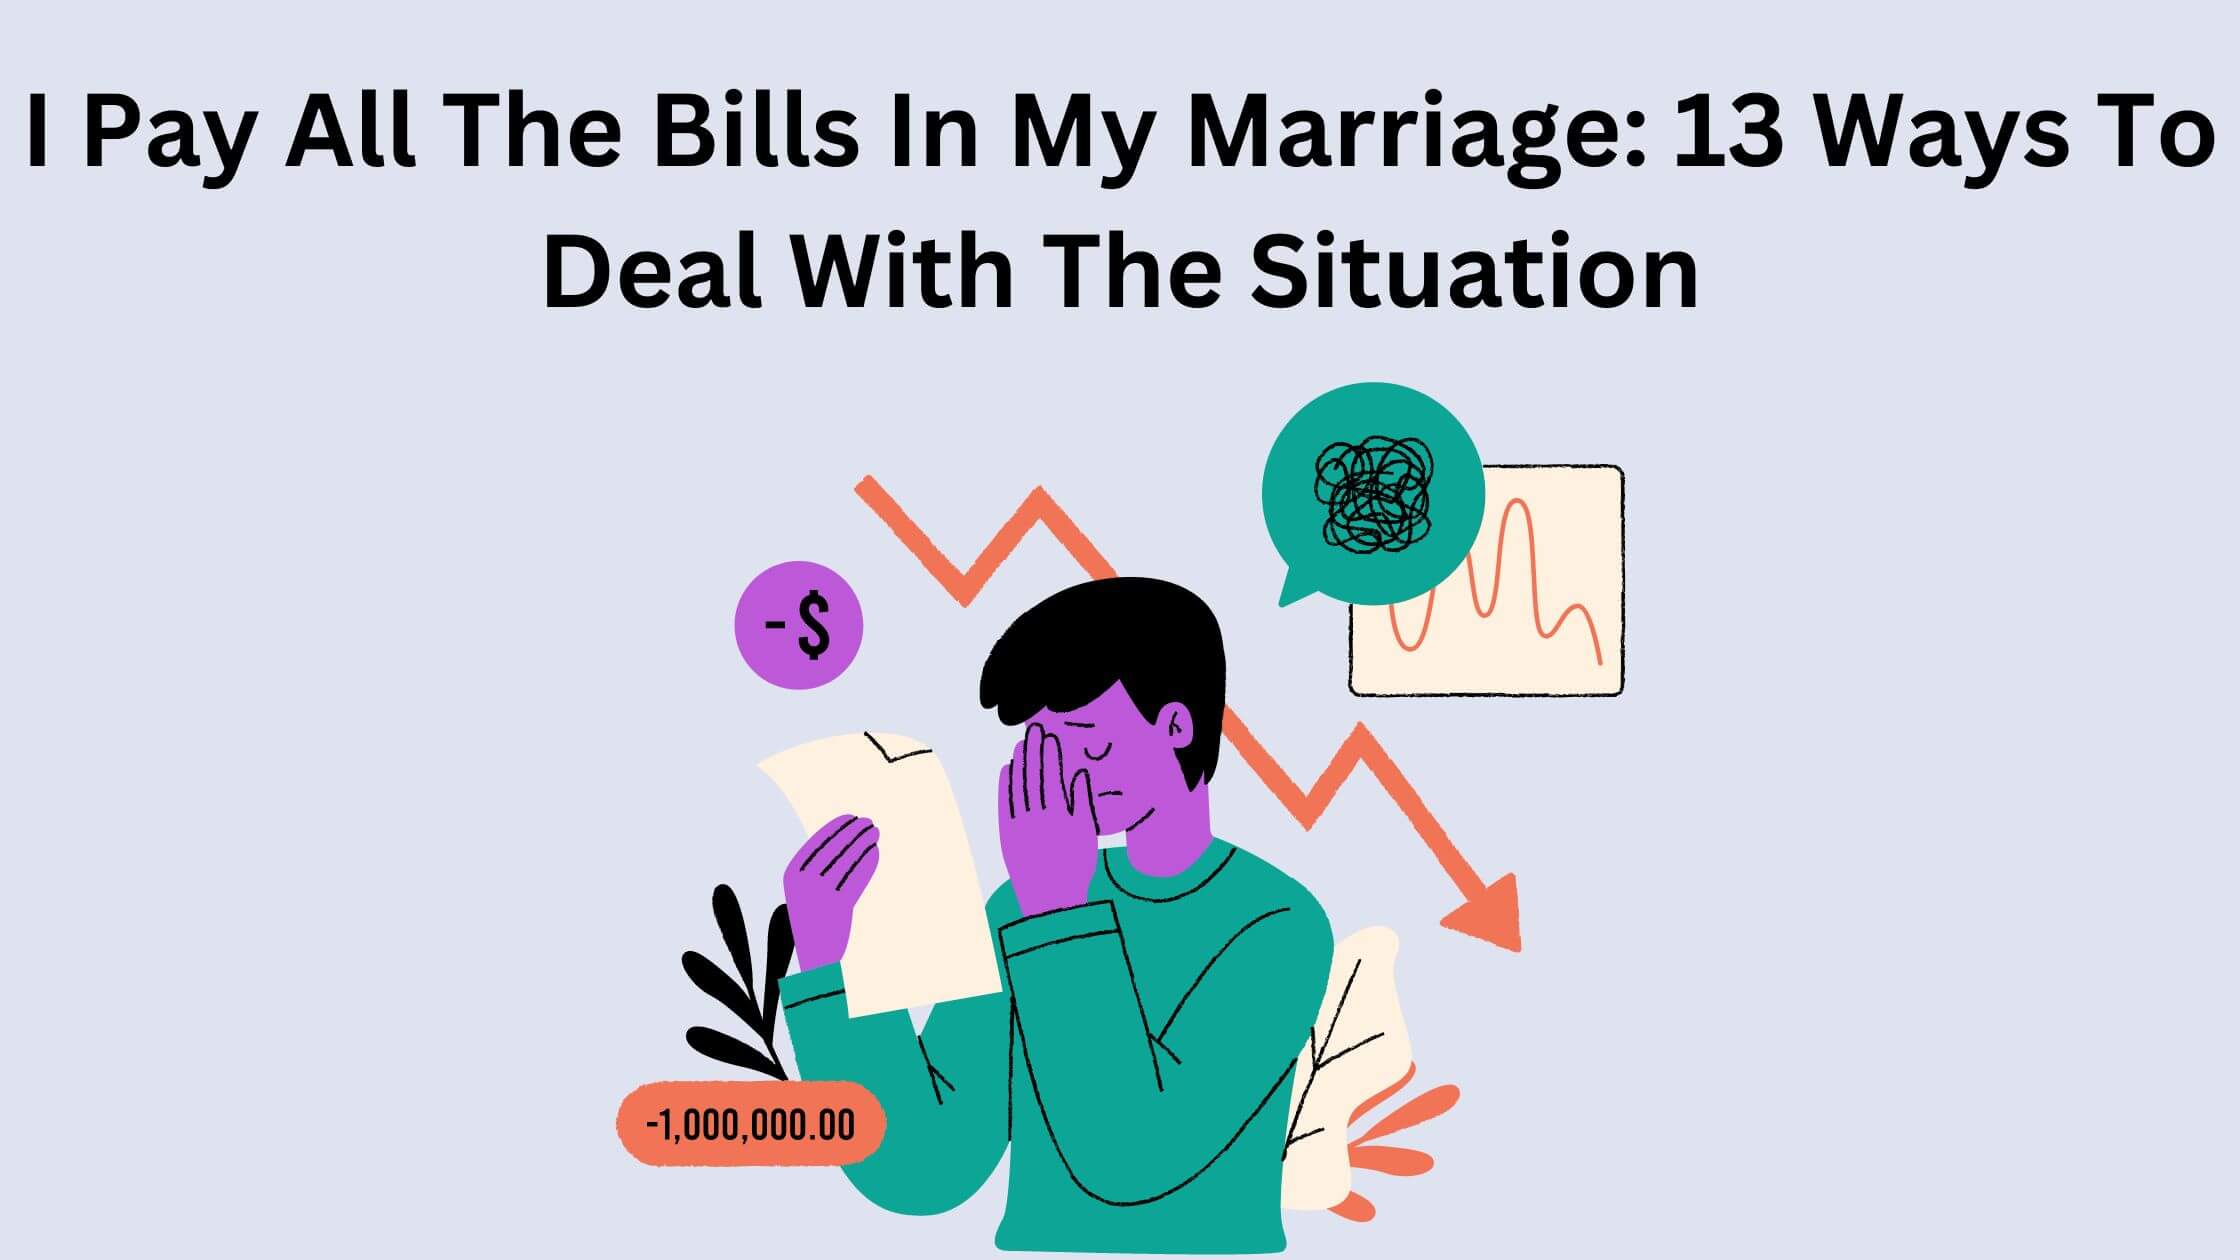 I Pay All The Bills In My Marriage